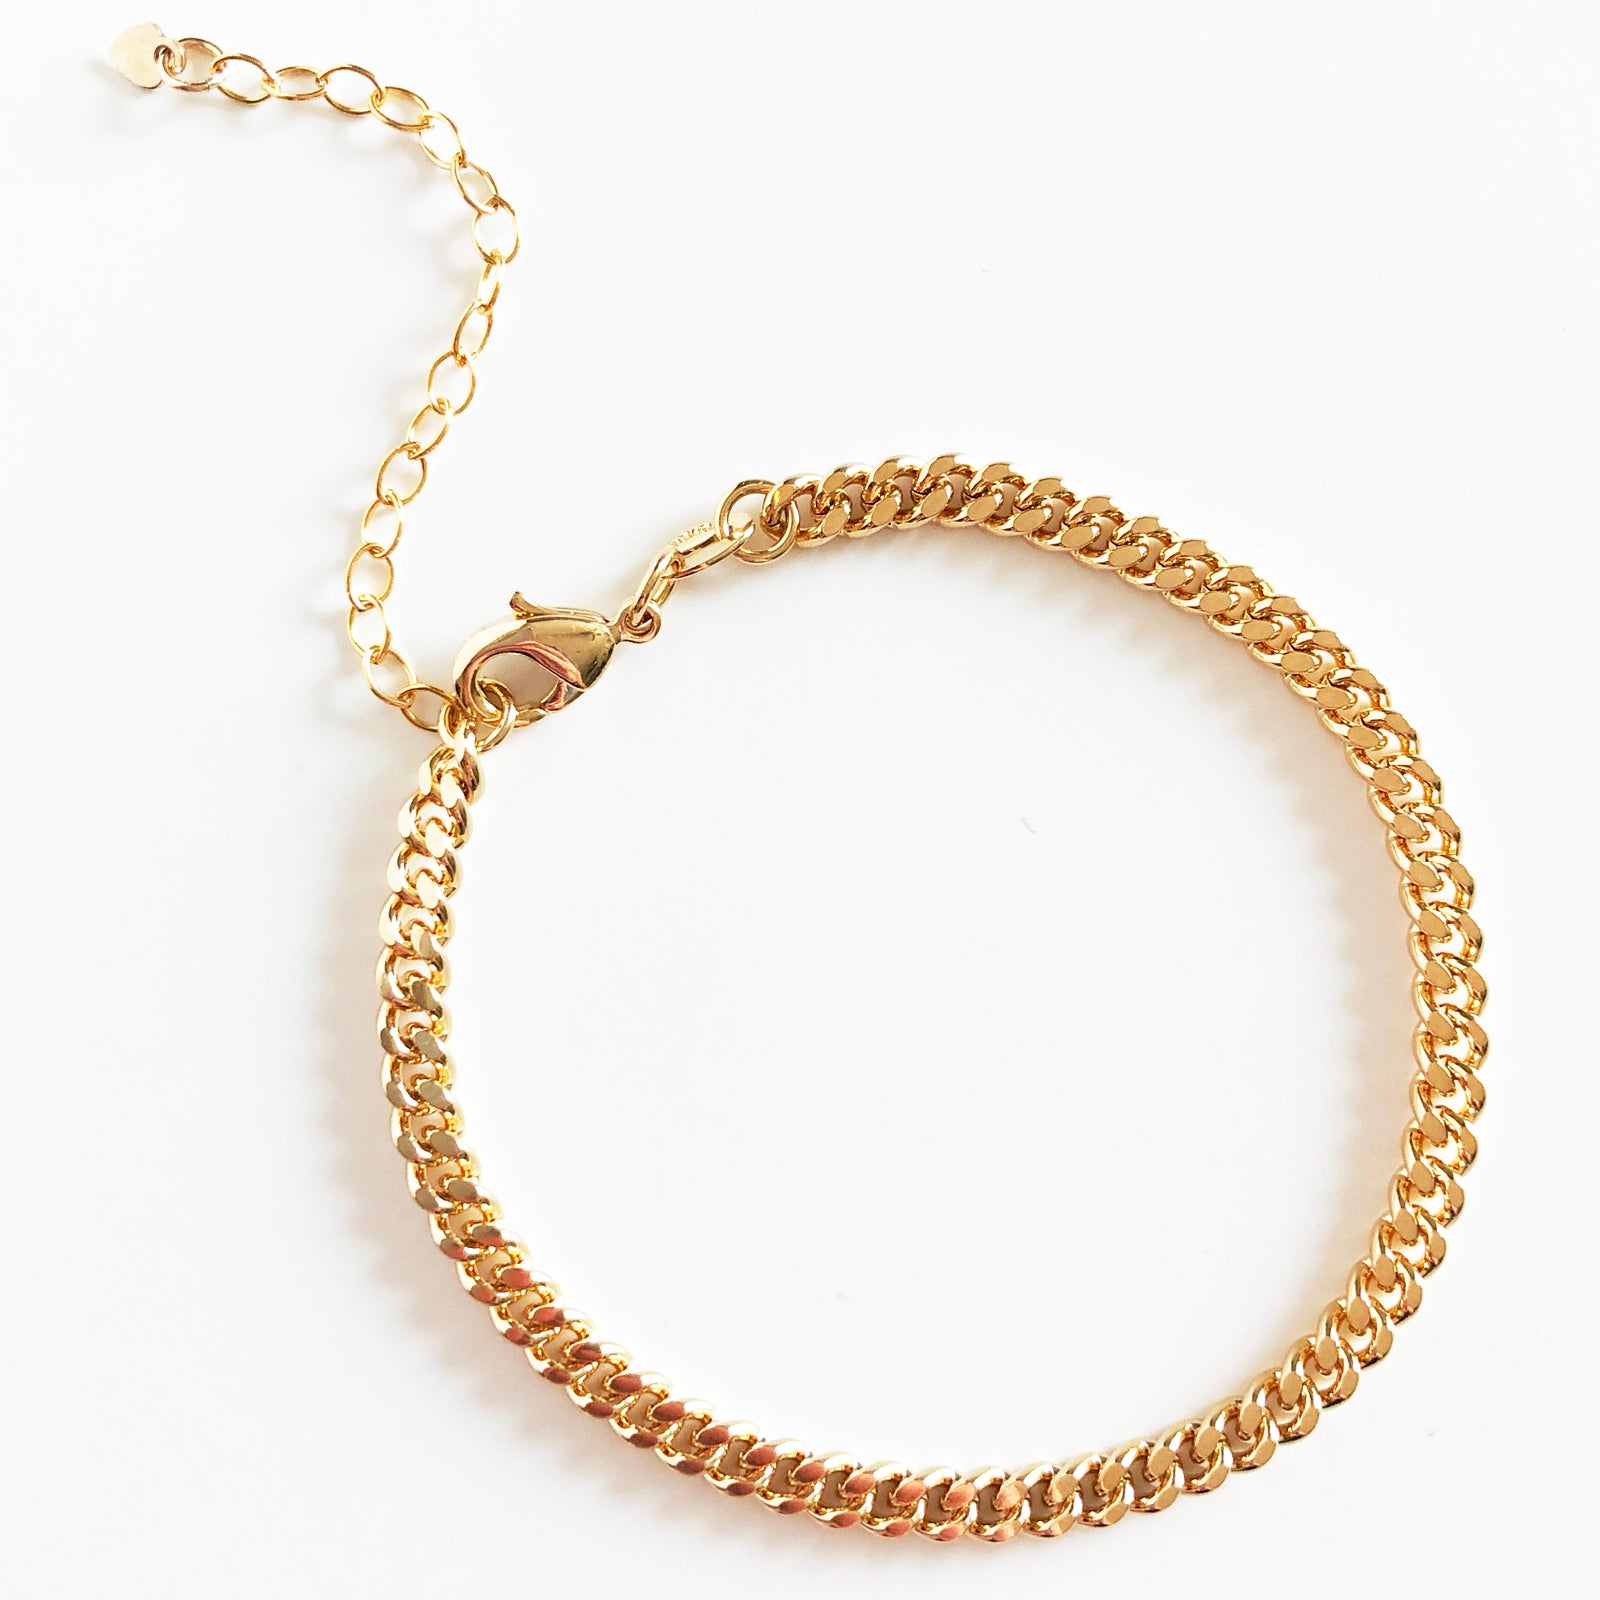 dainty gold curb link chain clasp bracelet